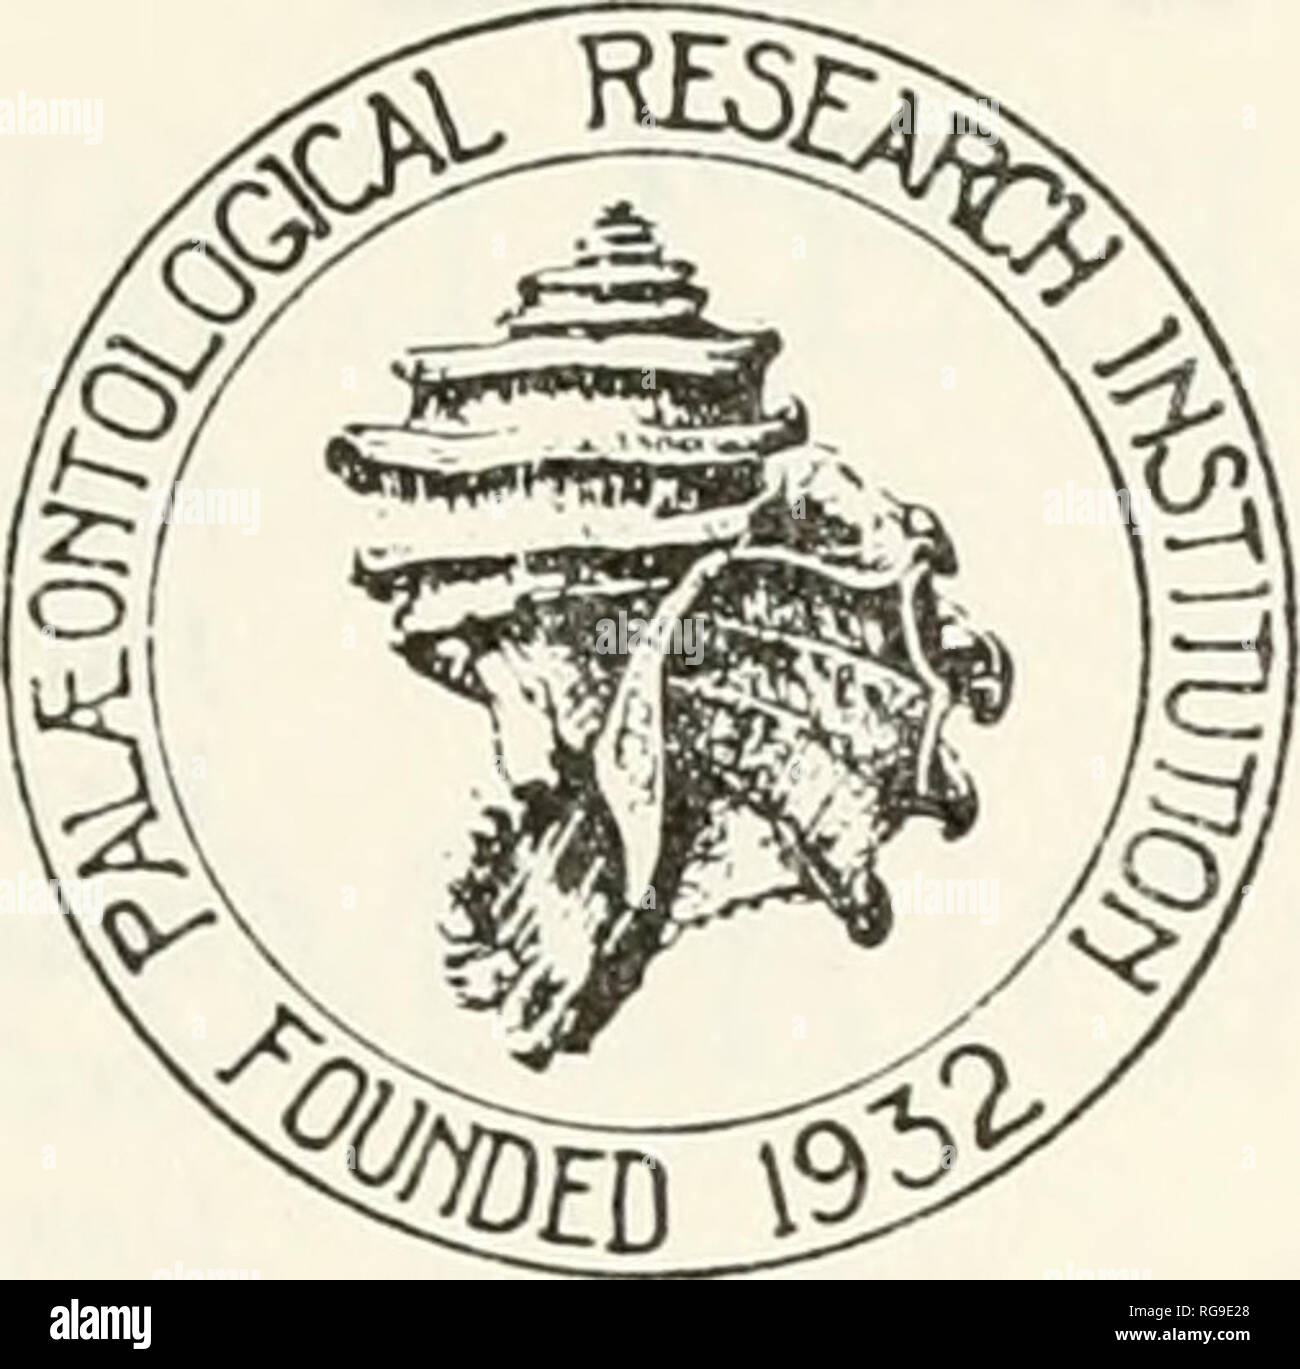 . Bulletins of American paleontology. . The Paleontological Research Institution acknowledges with special thanks the contributions of the following individuals and institutions PATRONS ($1000 or more at the discretion of the contributor) Armand L. Adams (1976) James A. Allen (1967) American Oil Company (1976) Atlantic Richfield Company (1978) Miss Ethel Z Bailey (1970) Christina L. Balk (1970) Mr. sc Mrs. Kenneth E. Caster (1967) Chevron Oil Company (1978) Exxon Company (1977 to date) Lois S. Fogelsanger (1966) Gulf Oil Corporation (1978) Merrill W. Haas (1975) Miss Rebecca S. Harris (1967) R Stock Photo